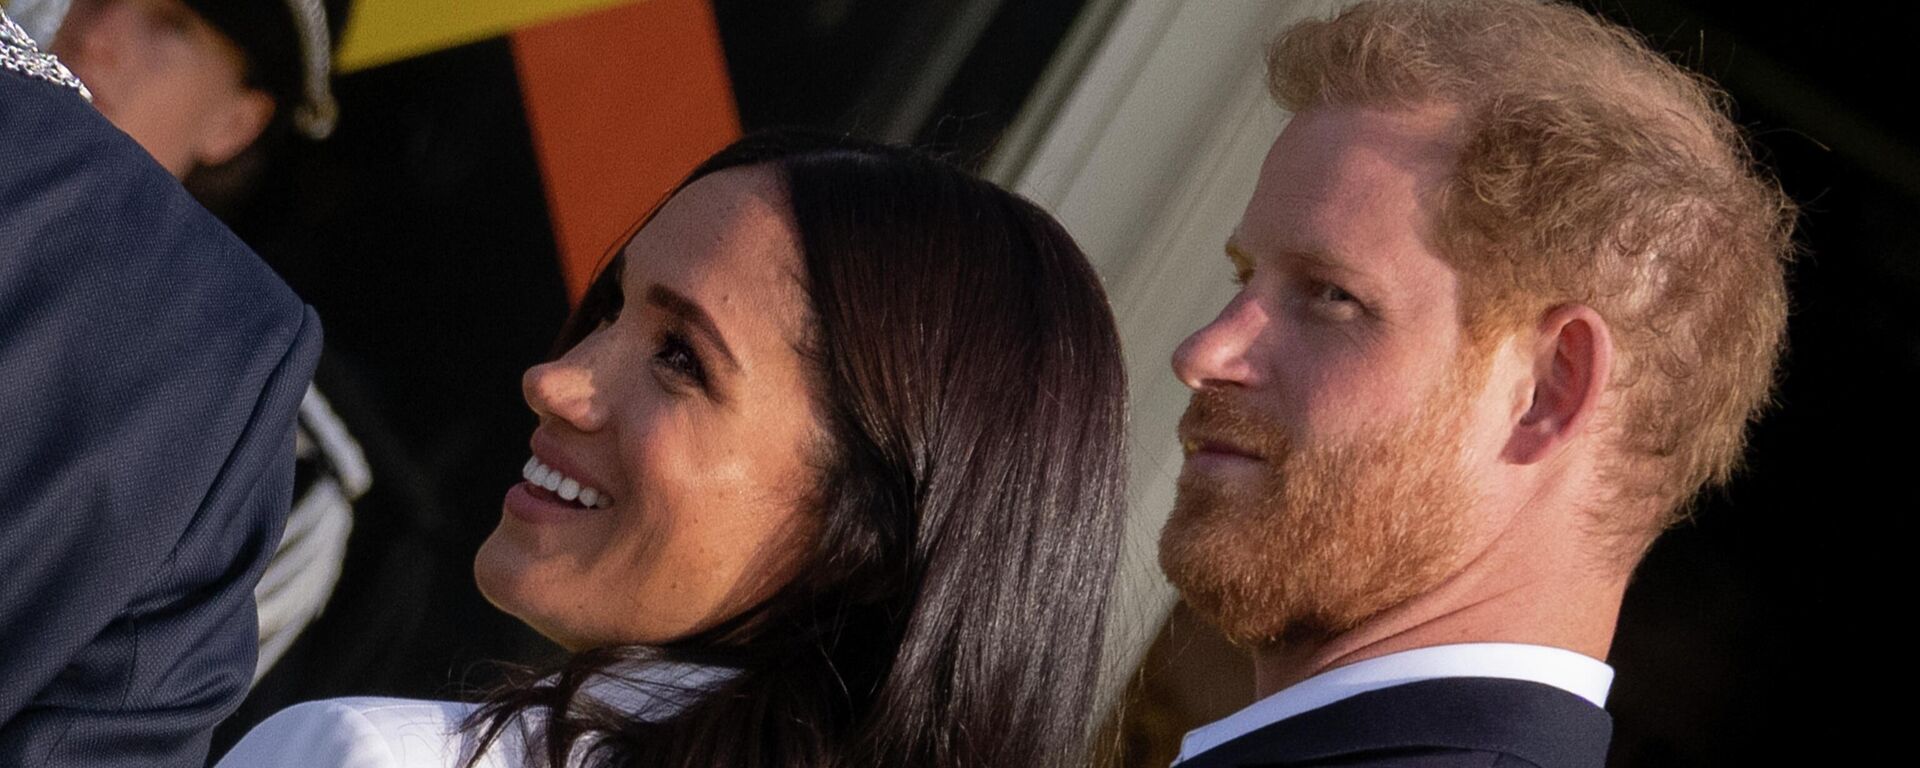 Prince Harry and Meghan Markle, Duke and Duchess of Sussex, arrive at the Invictus Games venue in The Hague, Netherlands, Friday, April 15, 2022.  - Sputnik International, 1920, 18.04.2022